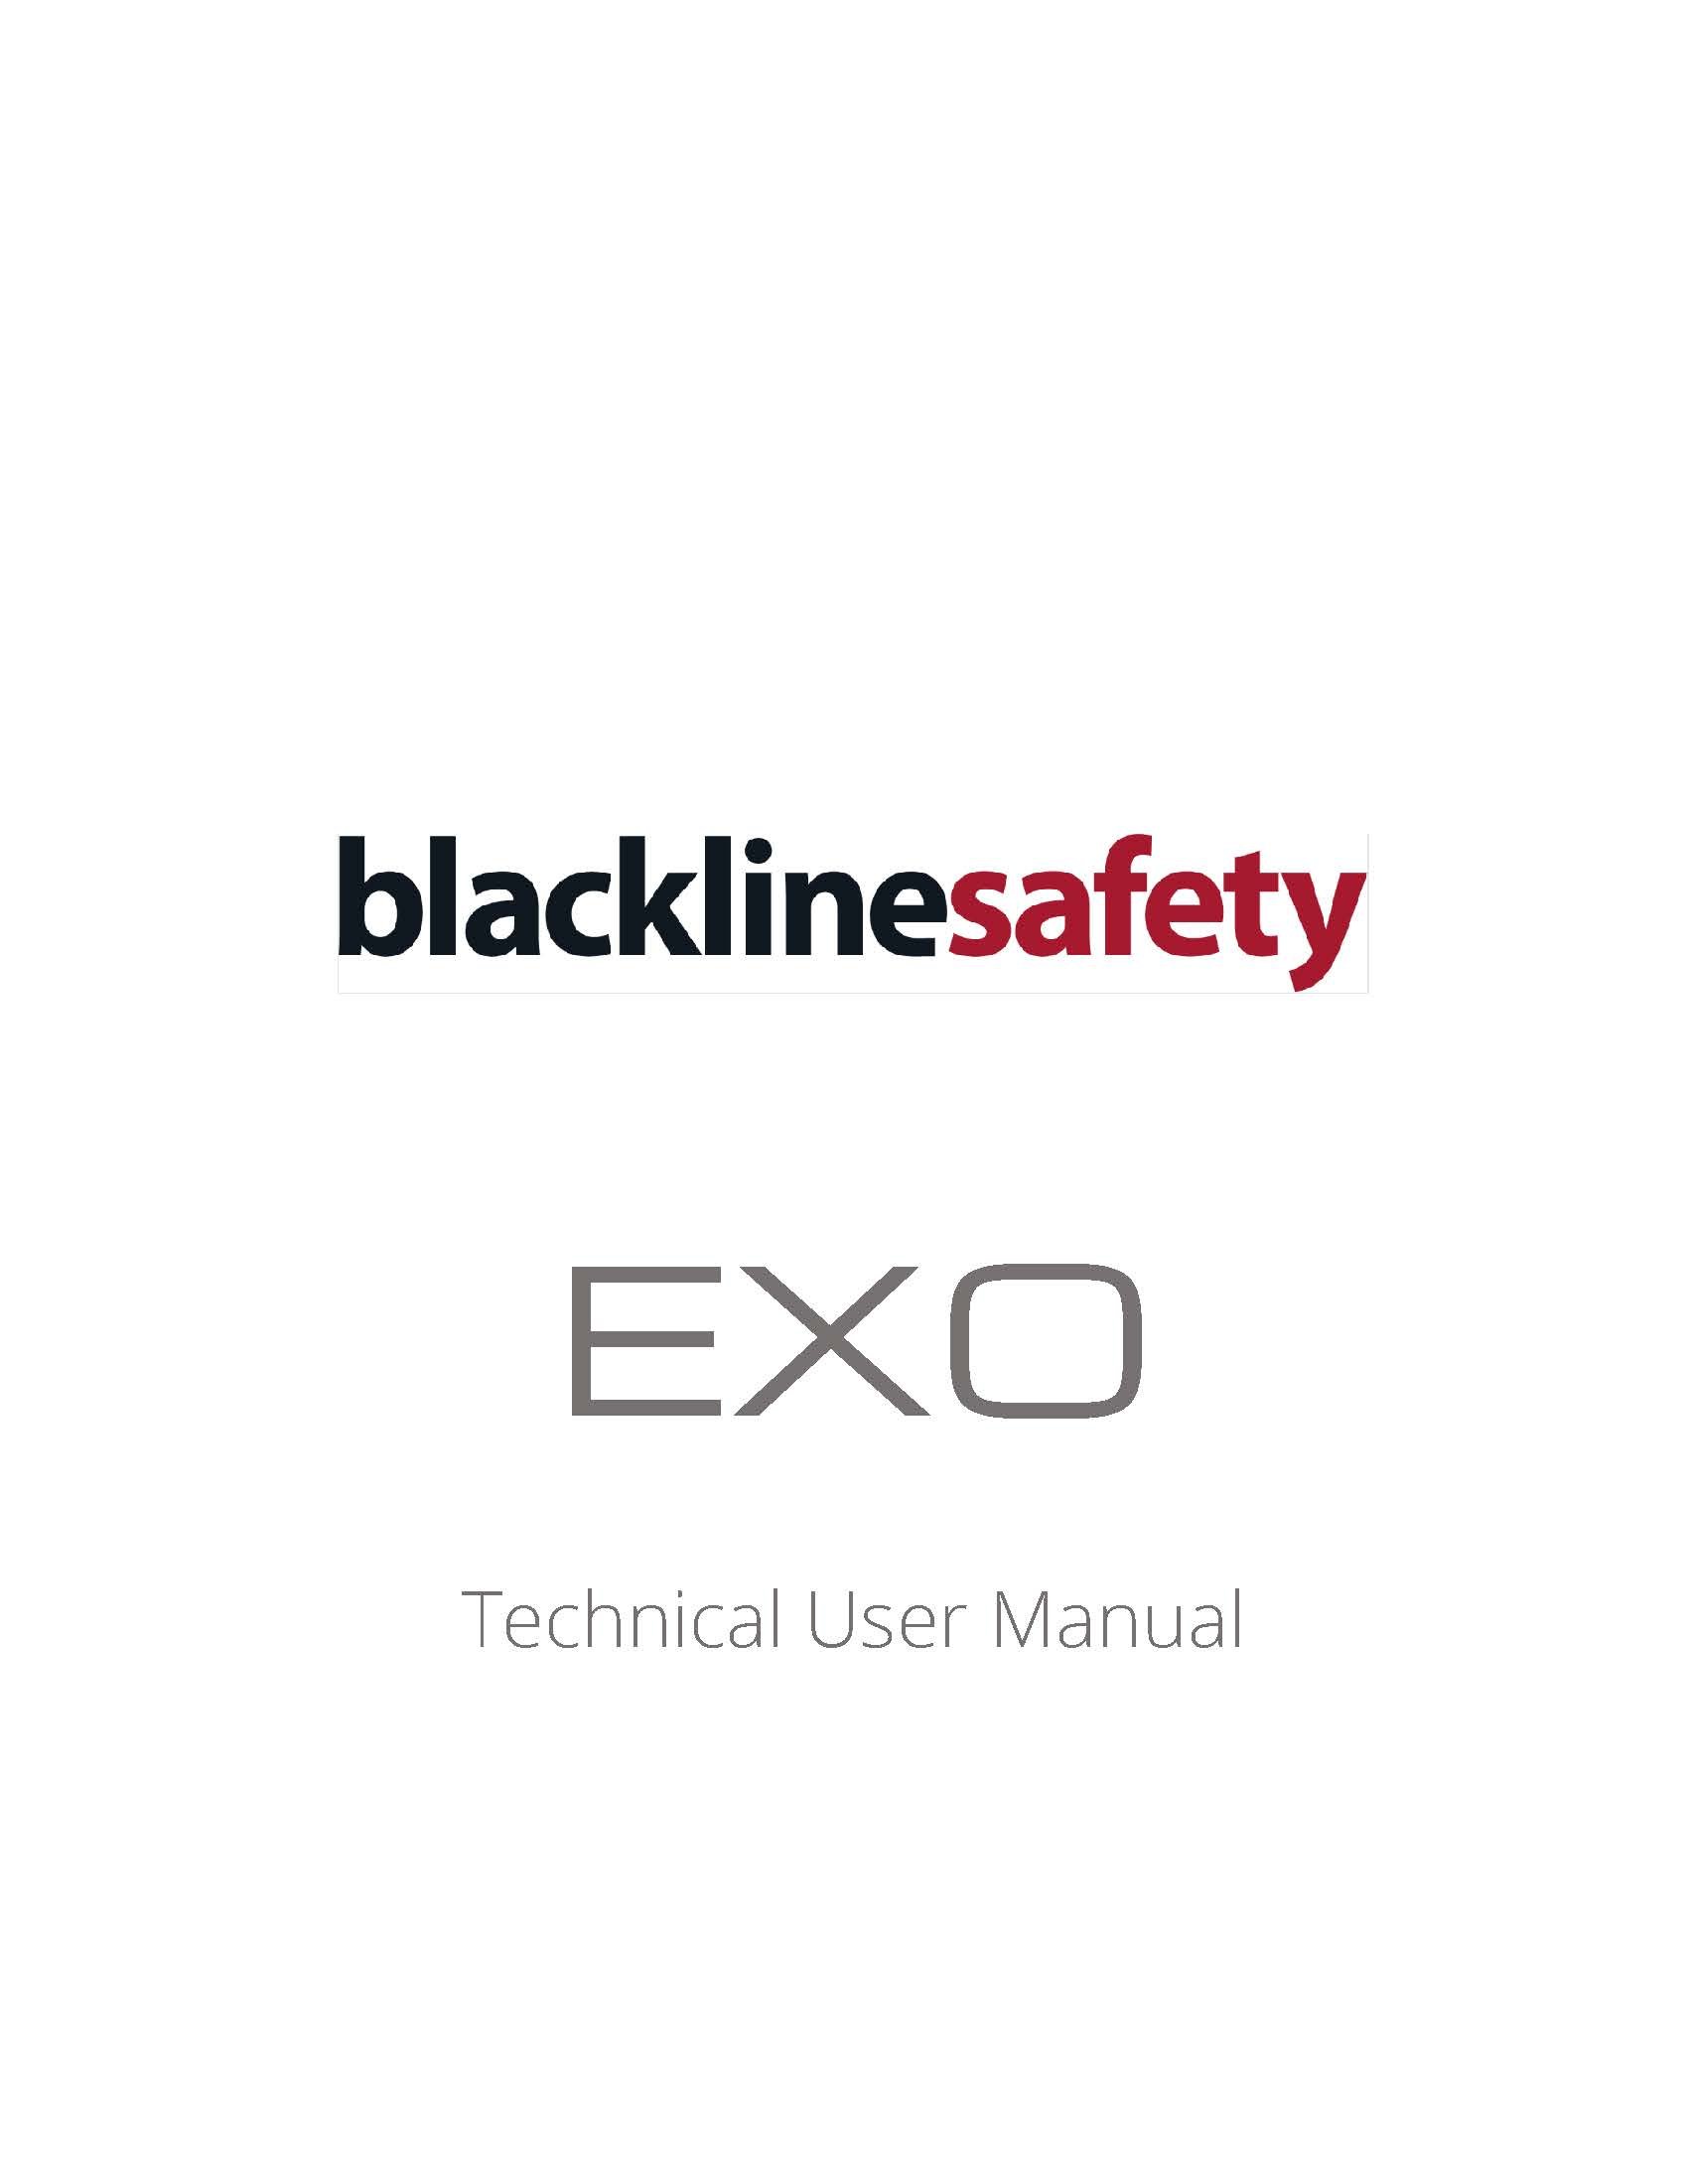 EXO Technical User Manual_R10 - EN - cover page